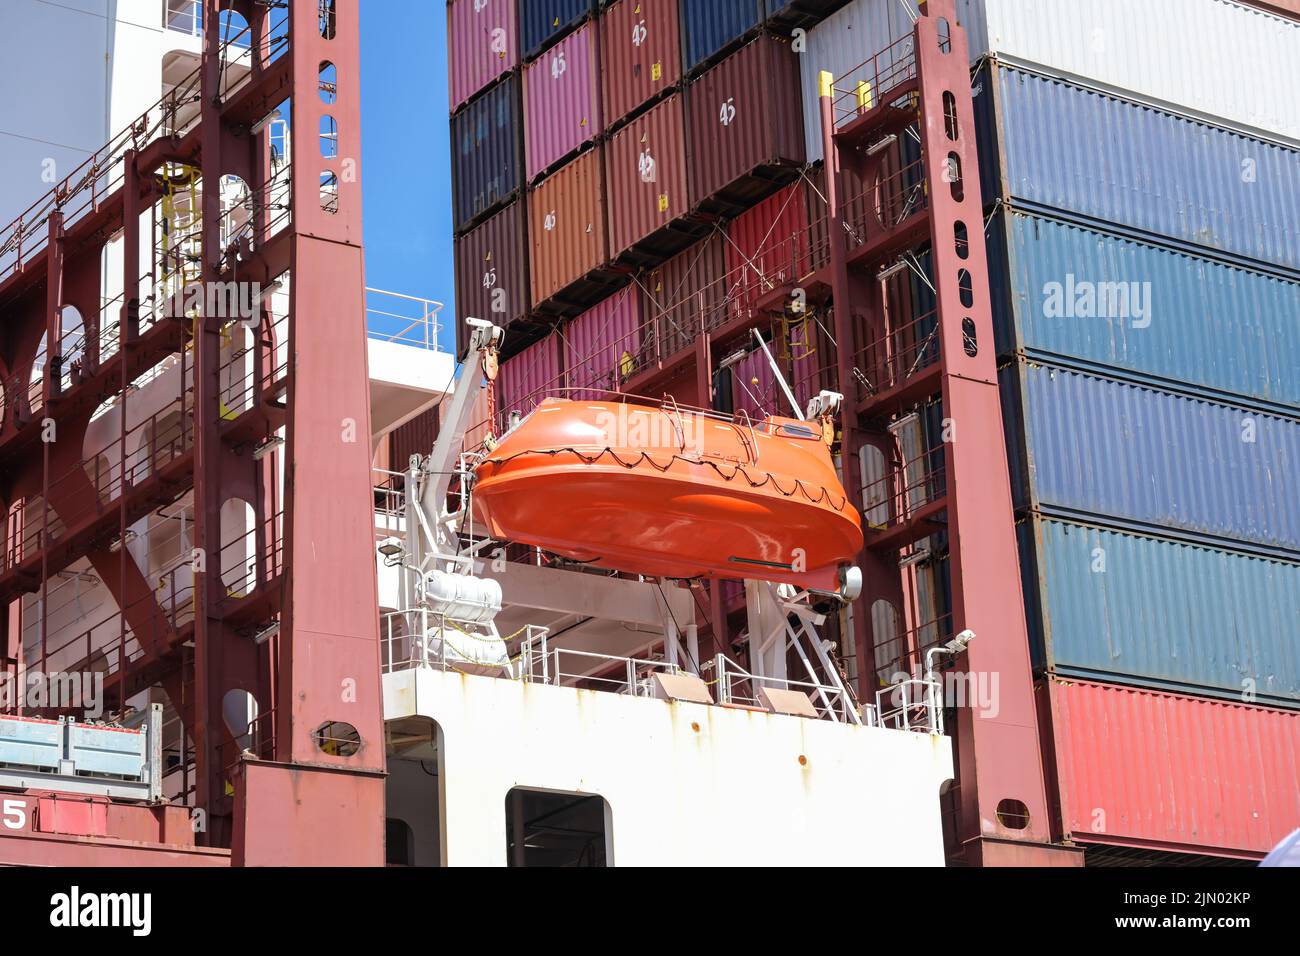 Life rescue boat between stacks of containers on a large cargo ship, shipping freight across international waters, safety at sea concept Stock Photo